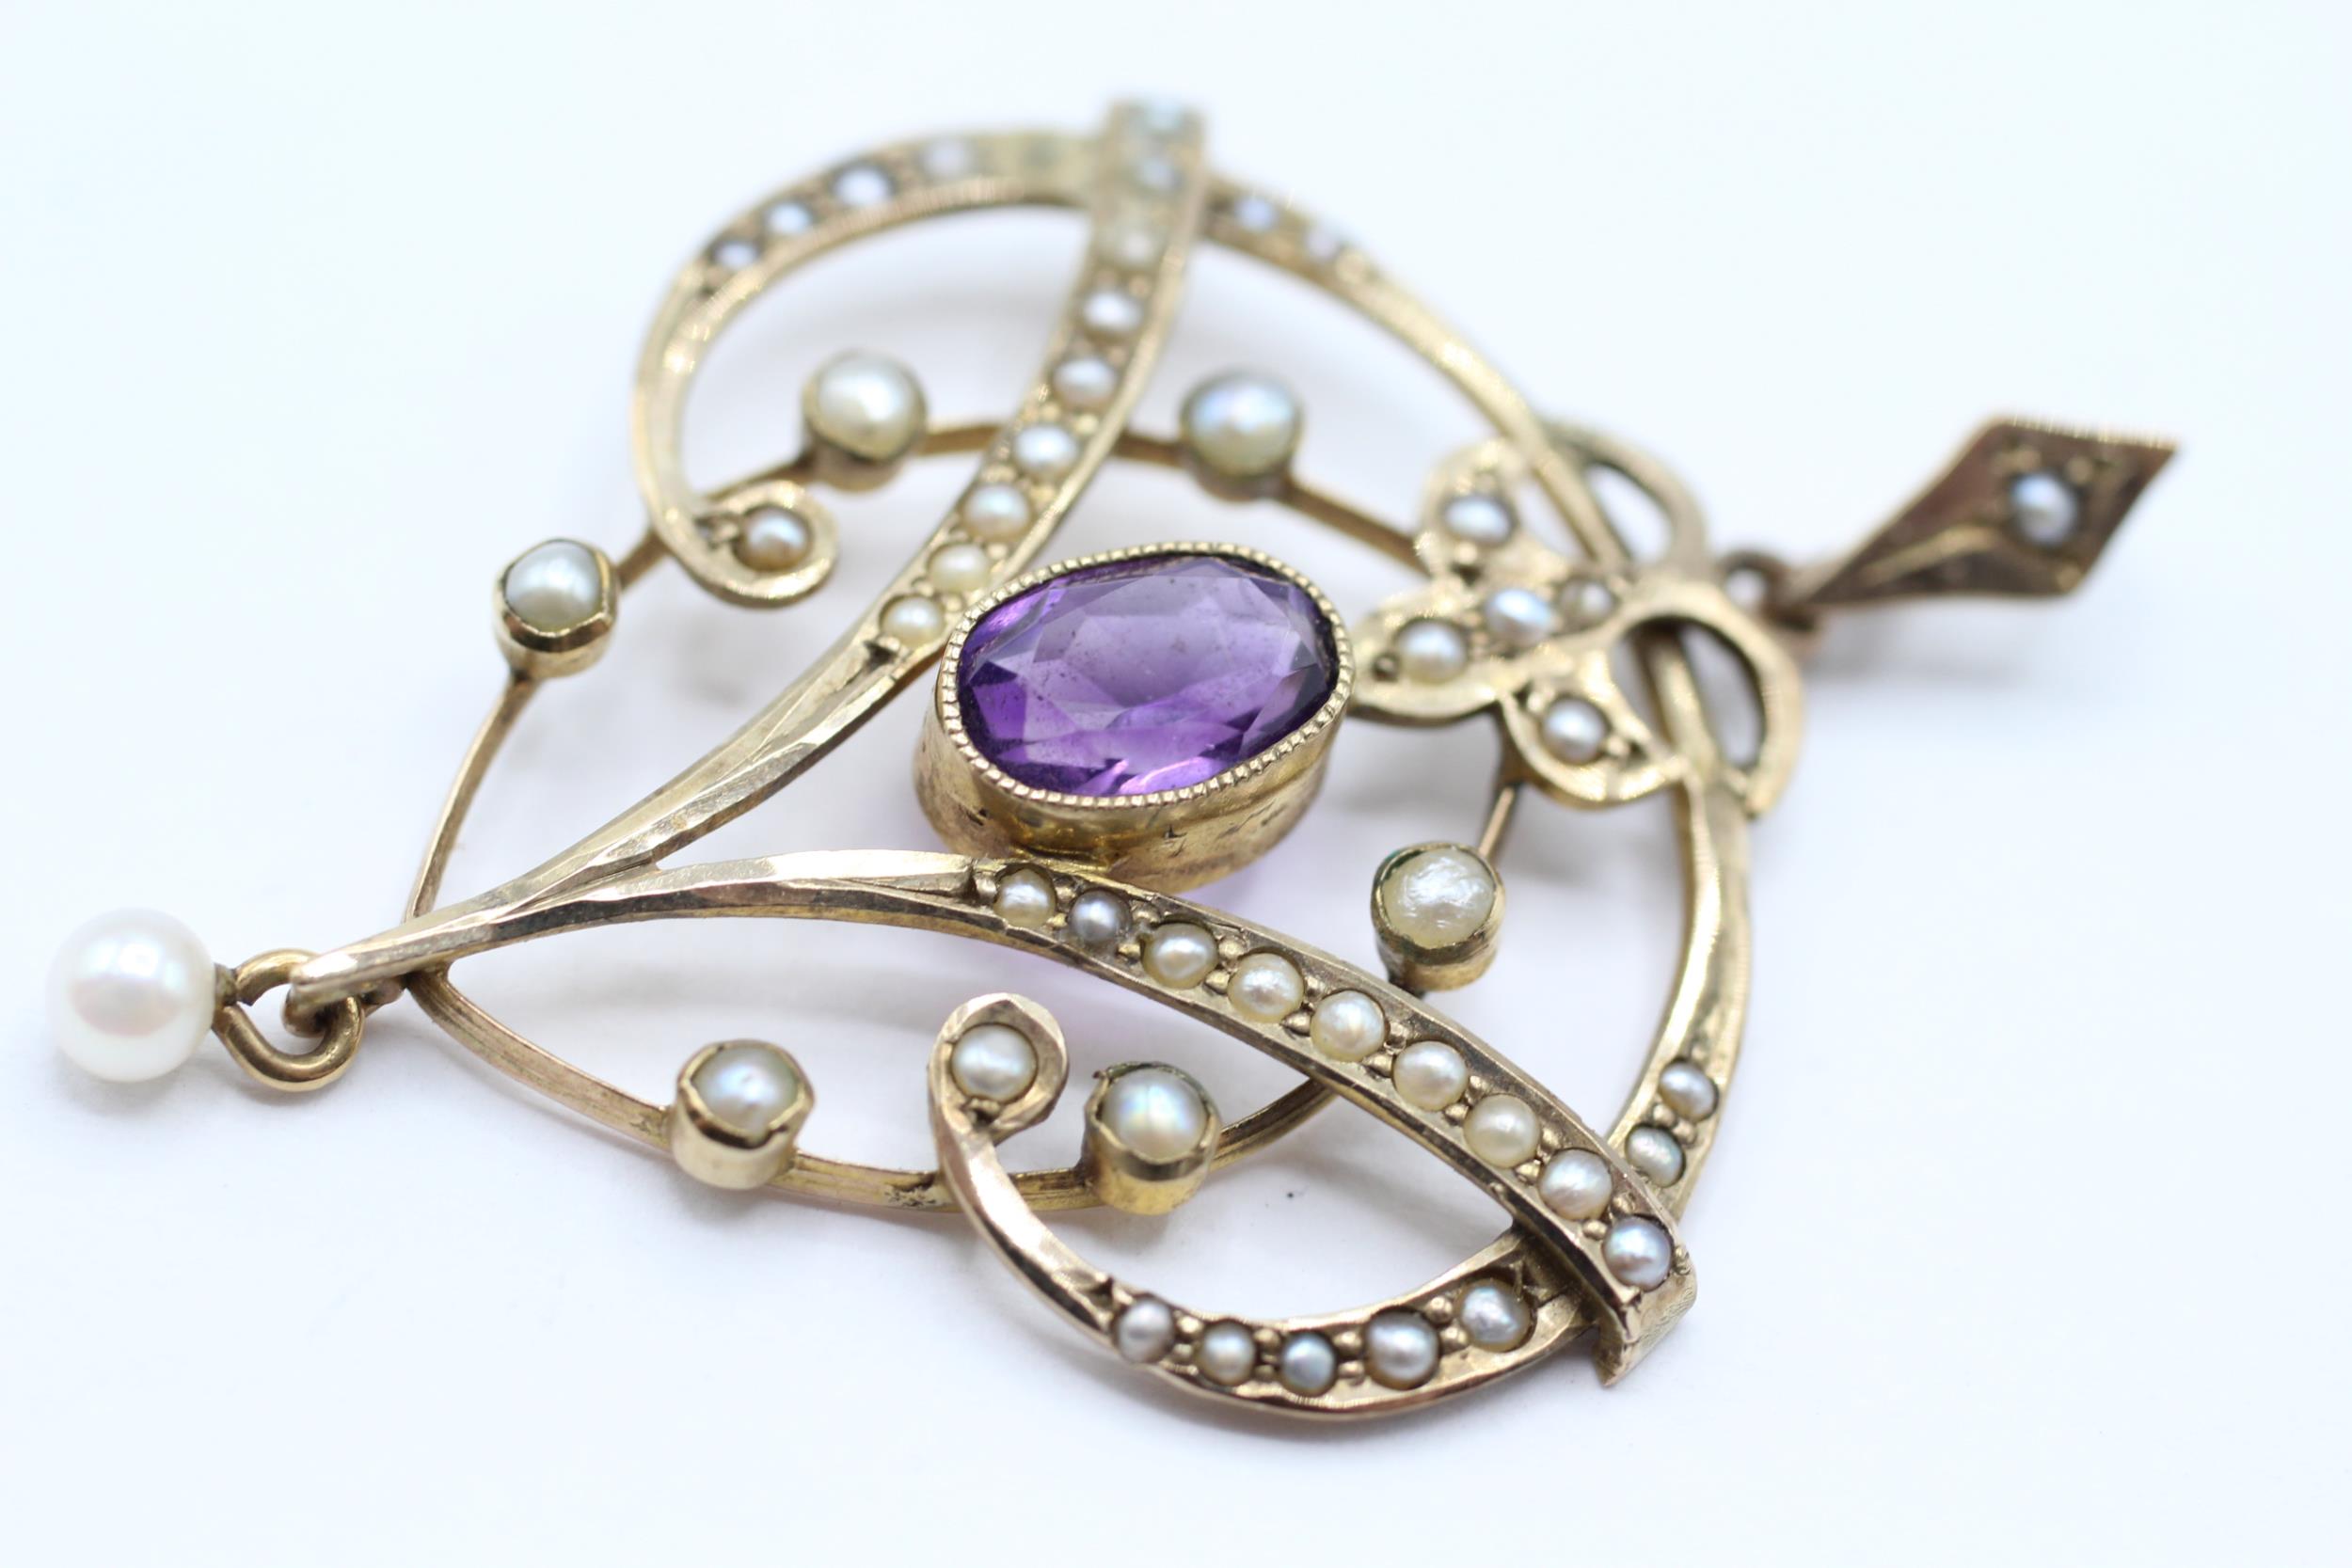 9ct gold Edwardian amethyst & seed pearl pendant with a drop cultured pearl 3.3 g - Bild 3 aus 5